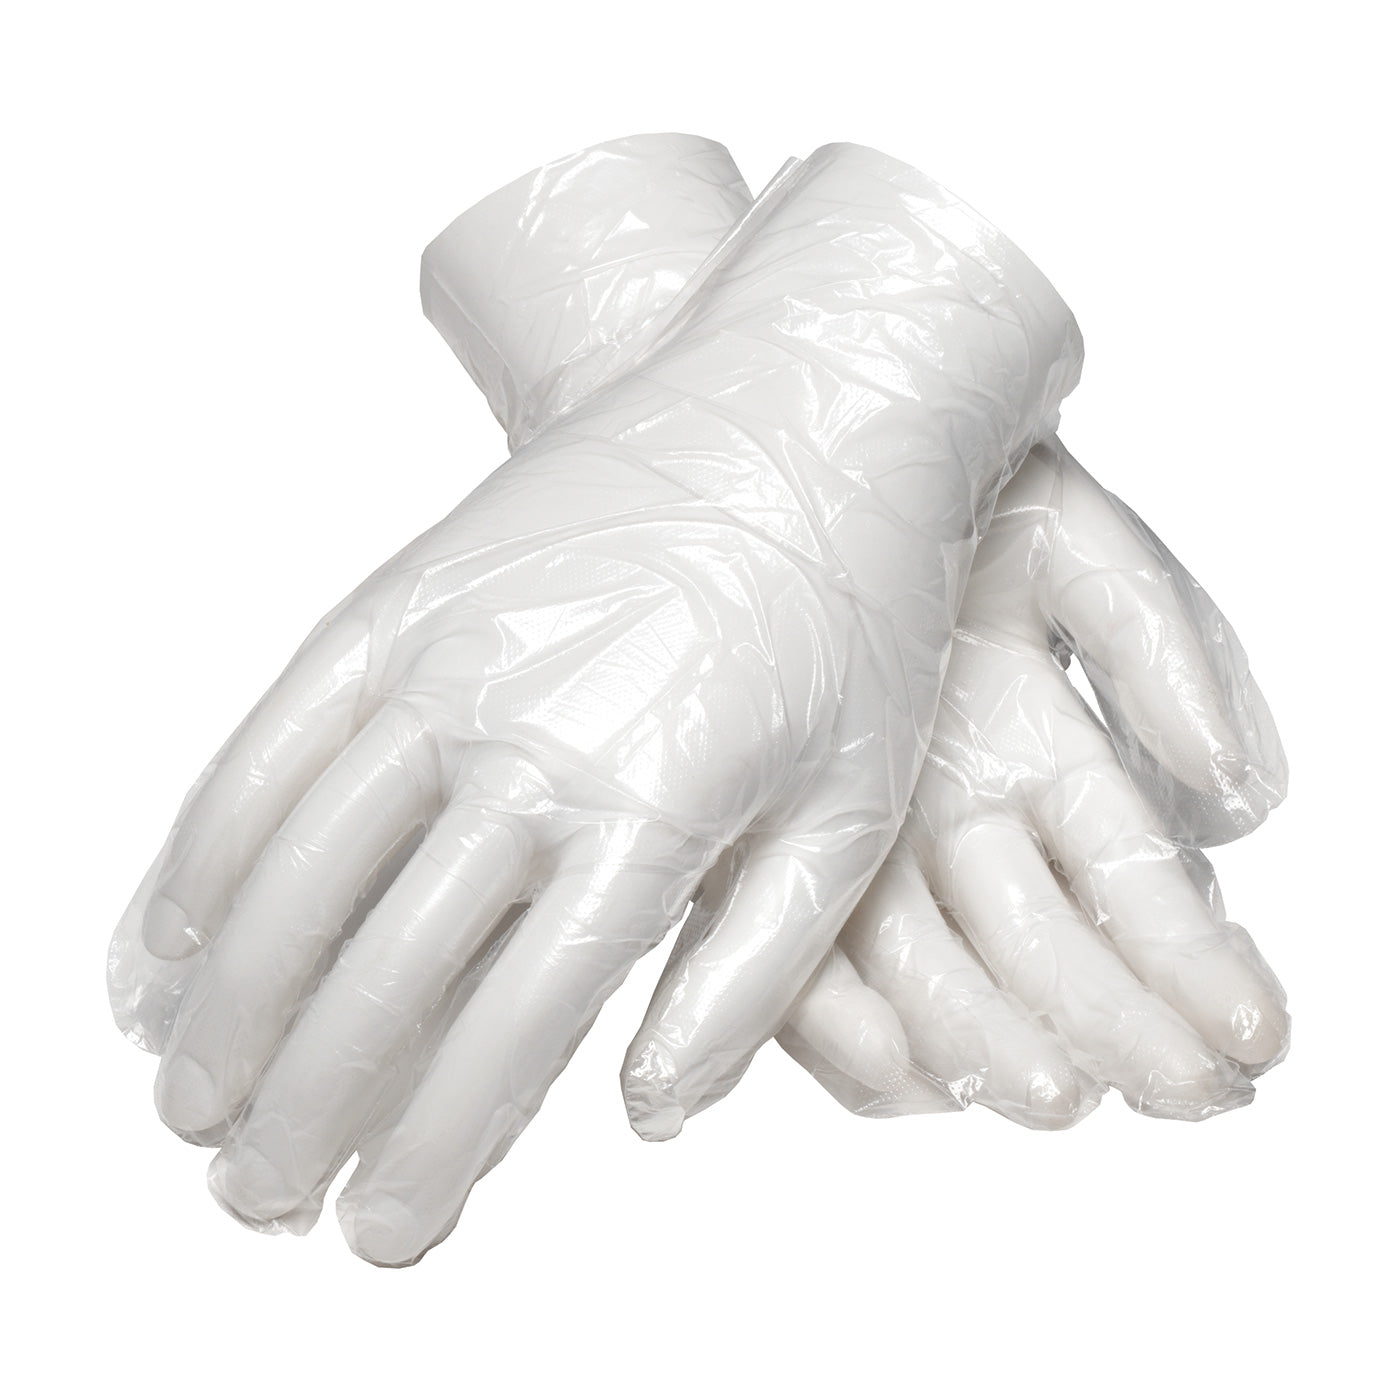 Ambi-dex 65-553/S Food Grade Disposable Polyethylene Glove with Silky Finish Grip- Discontinued Limited Quantities Available